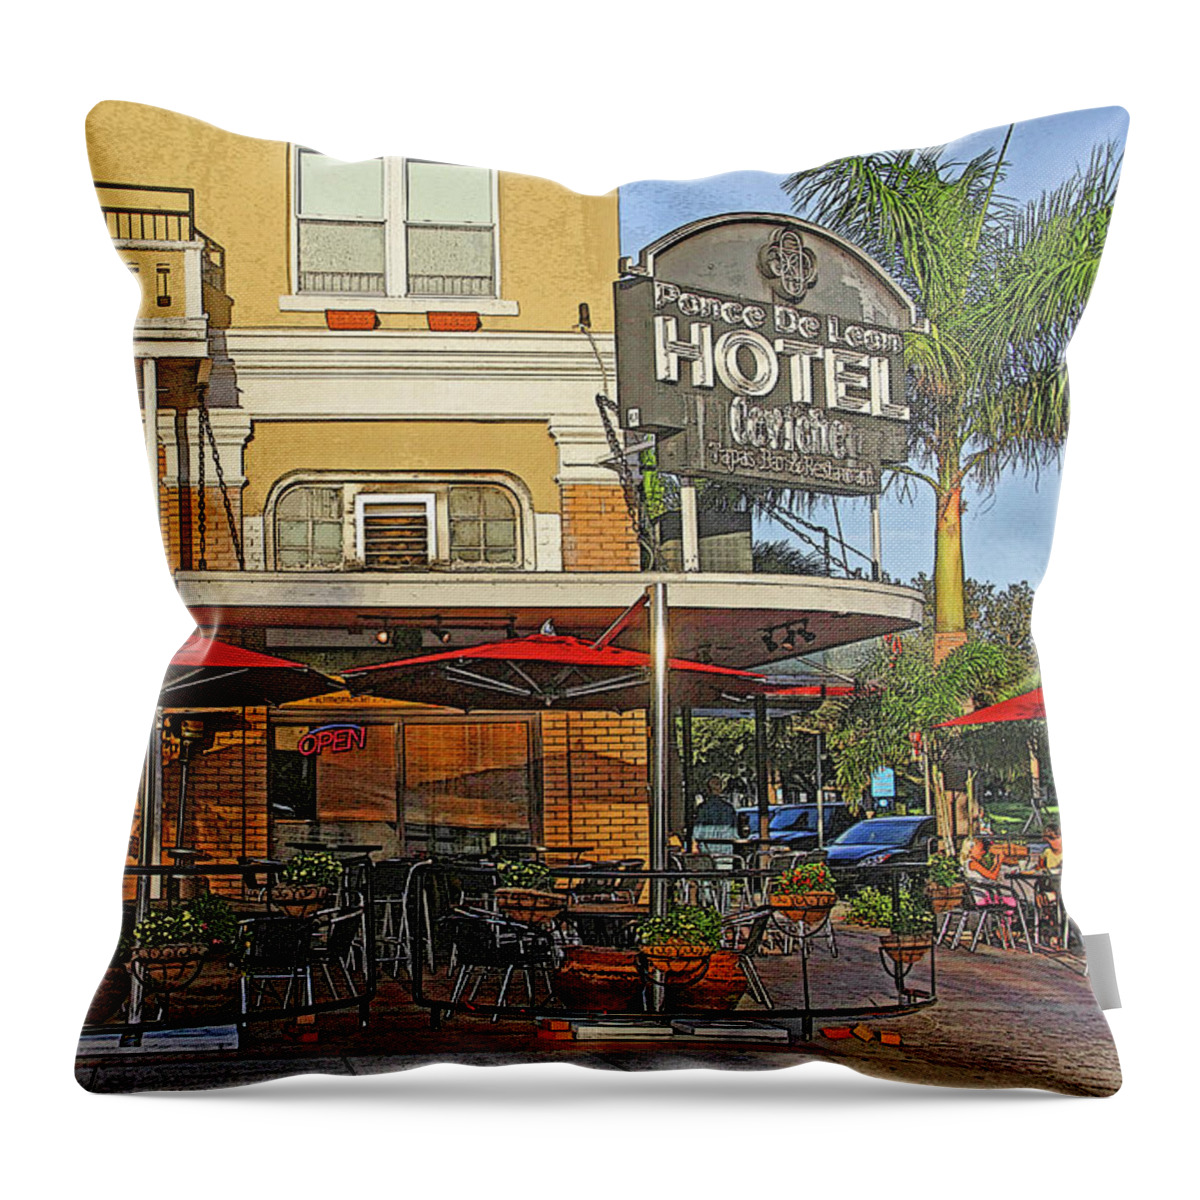 Ponce De Leon Hotel Throw Pillow featuring the photograph The Ponce De Leon Hotel by HH Photography of Florida